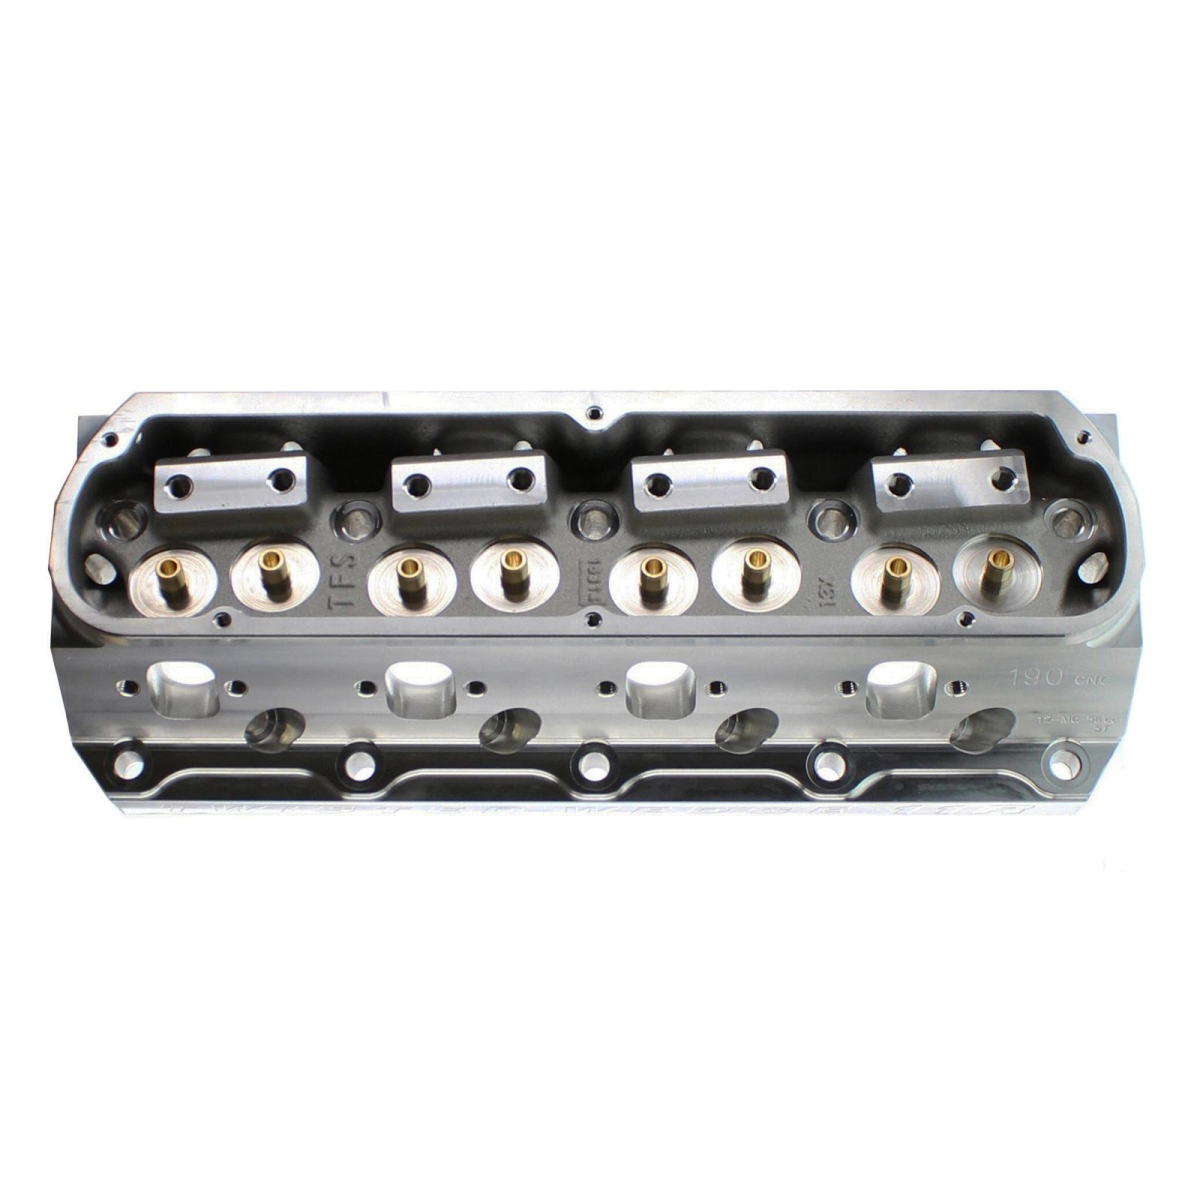 Trickflow - Trick Flow Twisted Wedge 11R Competition 190cc Bare Cylinder Head Casting, SBF, 56cc Chambers - Image 1